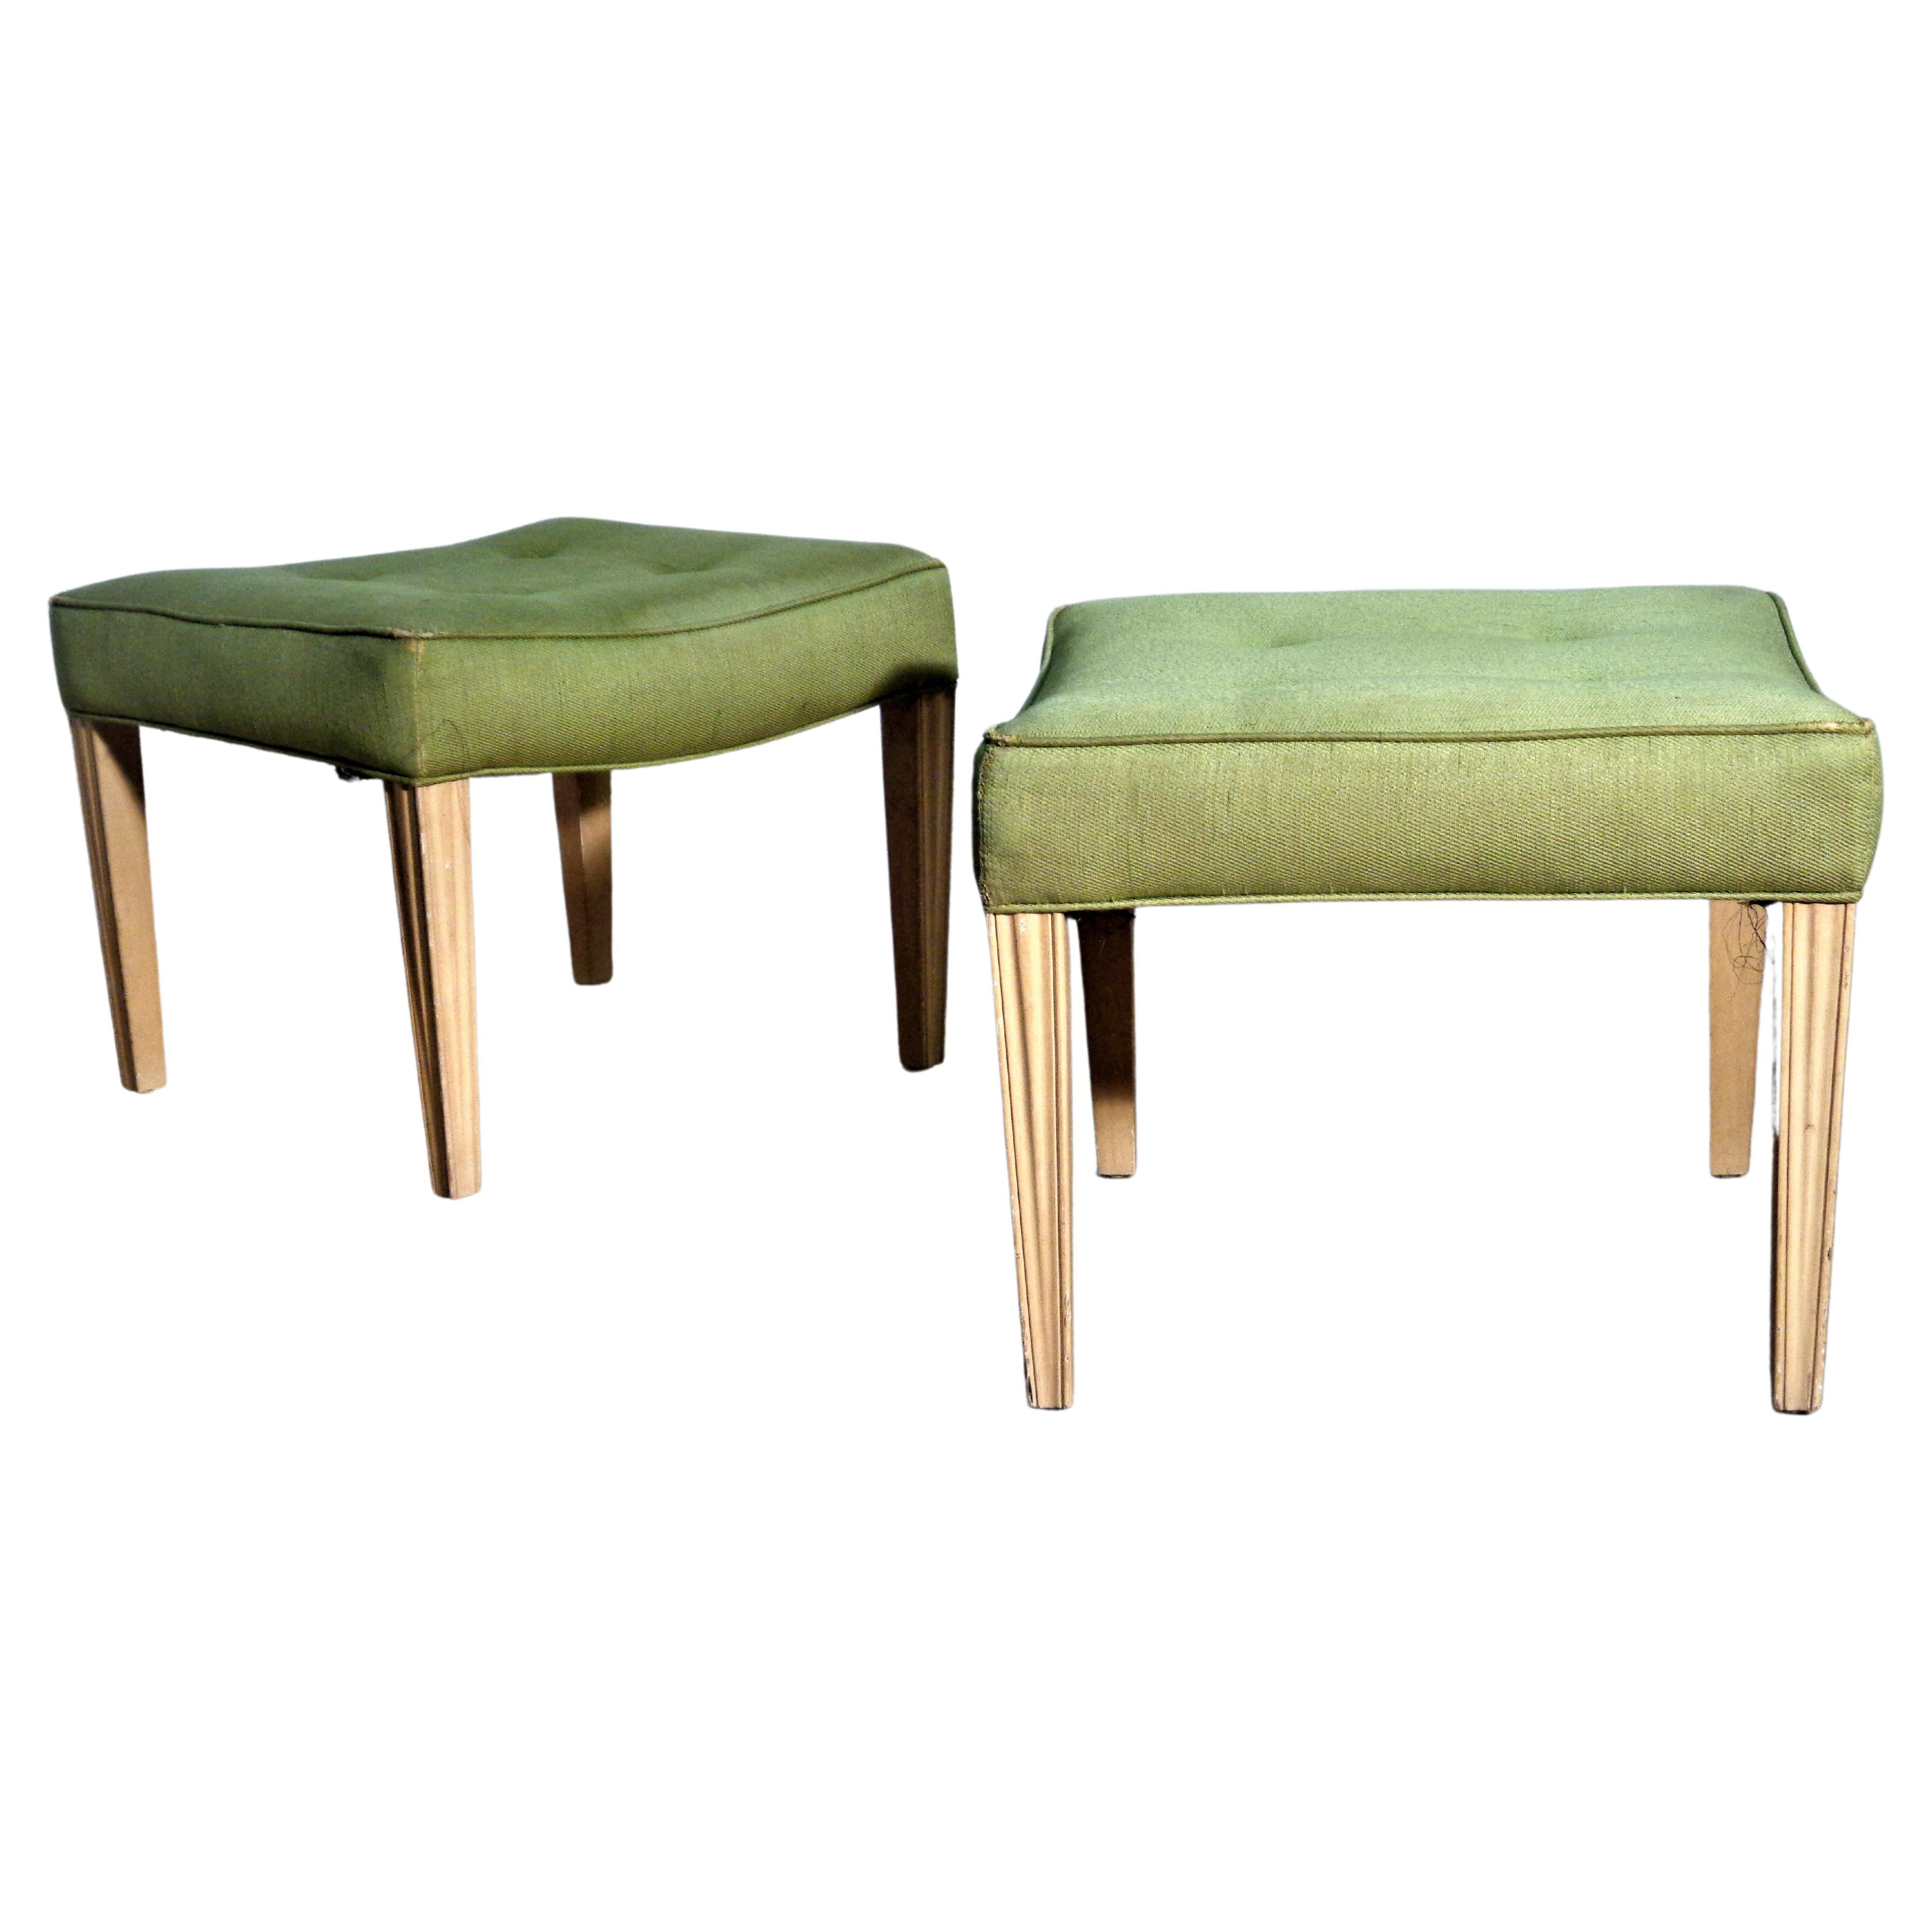 American Pair of Regency Style Stools, 1940's For Sale